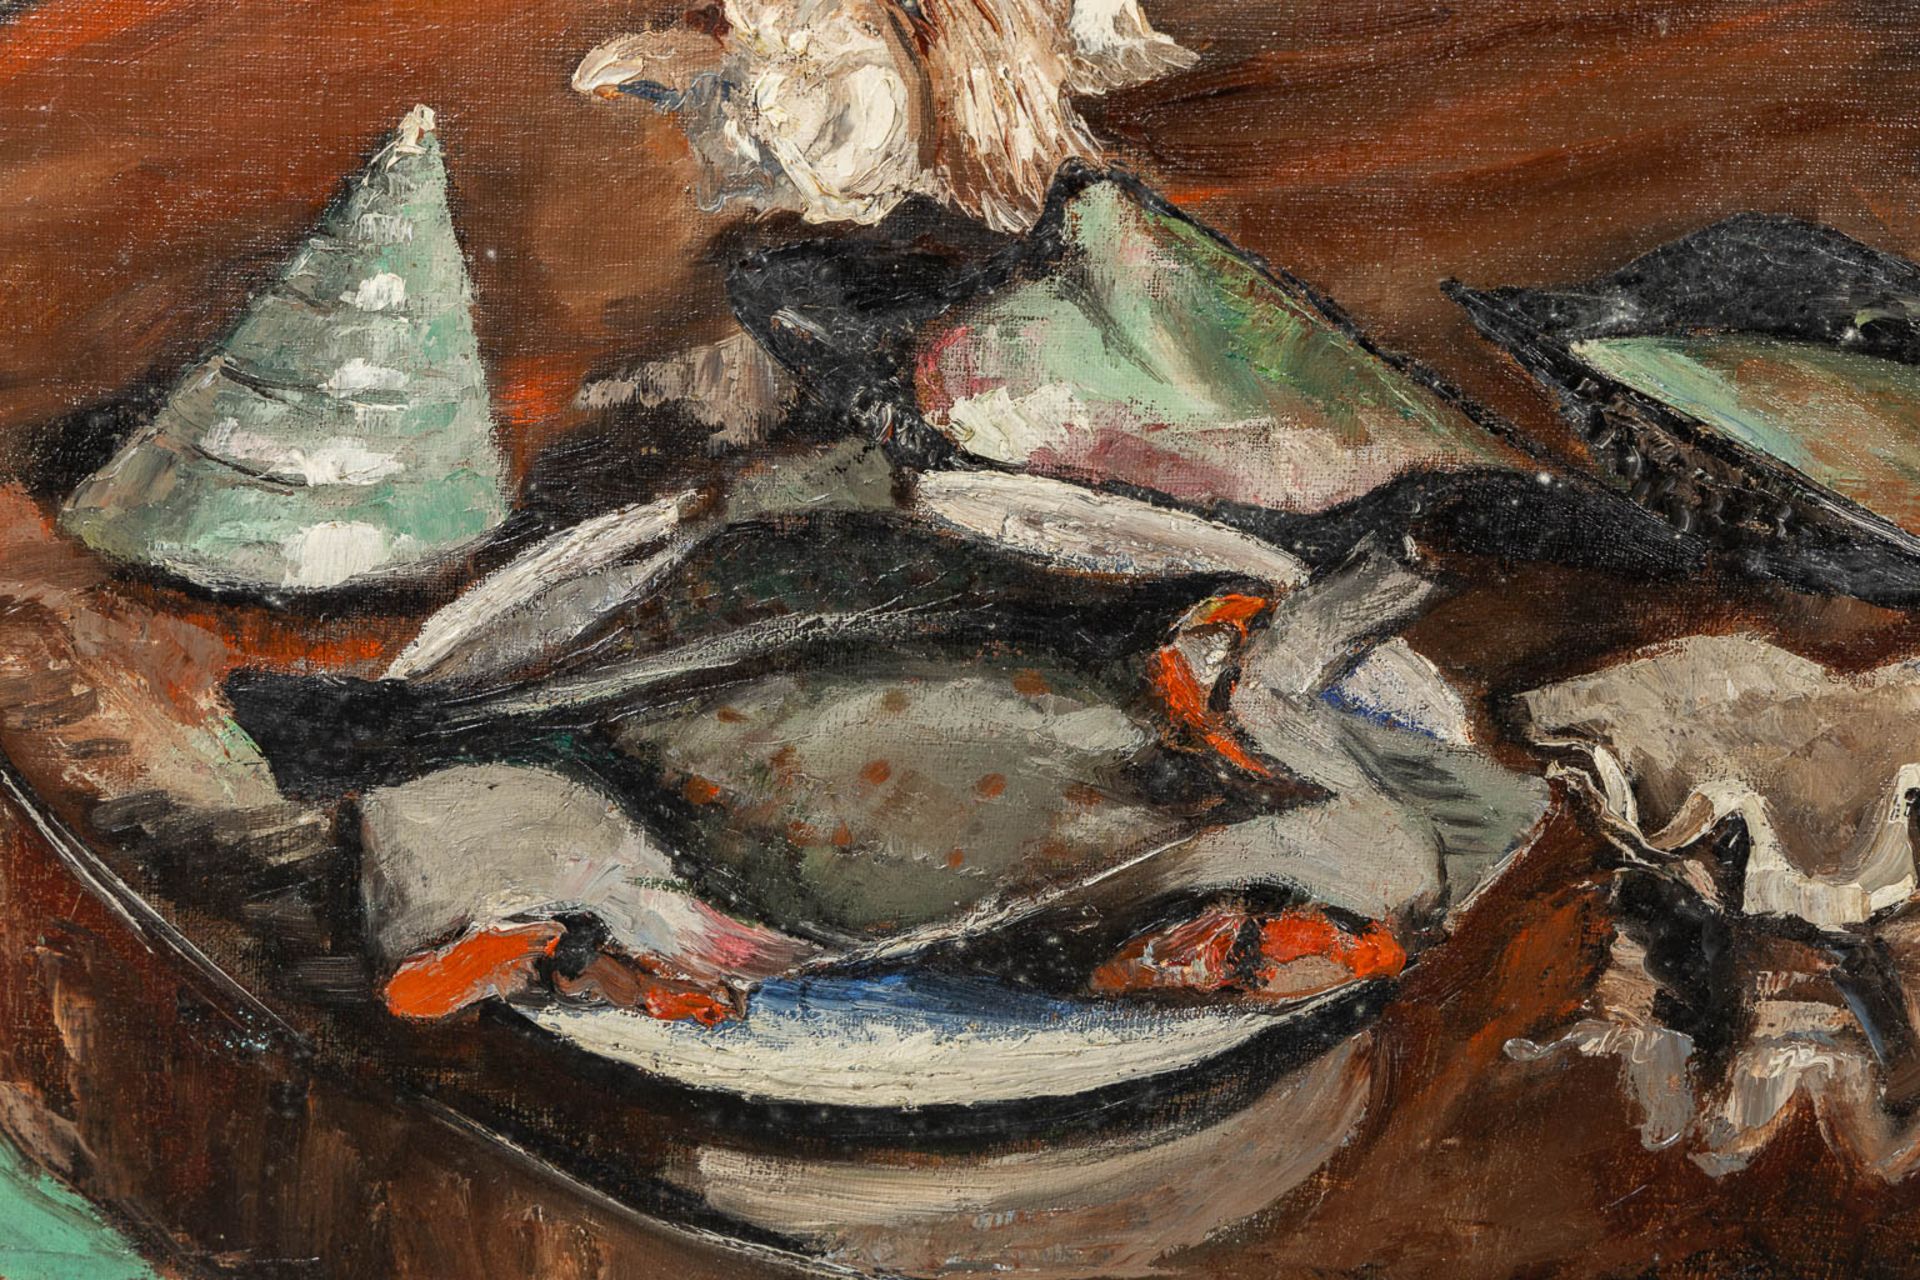 Henri KERELS (1896-1956) 'Still life with Mussles and Flatfish' oil on canvas. (W:60 x H:50 cm) - Image 4 of 6